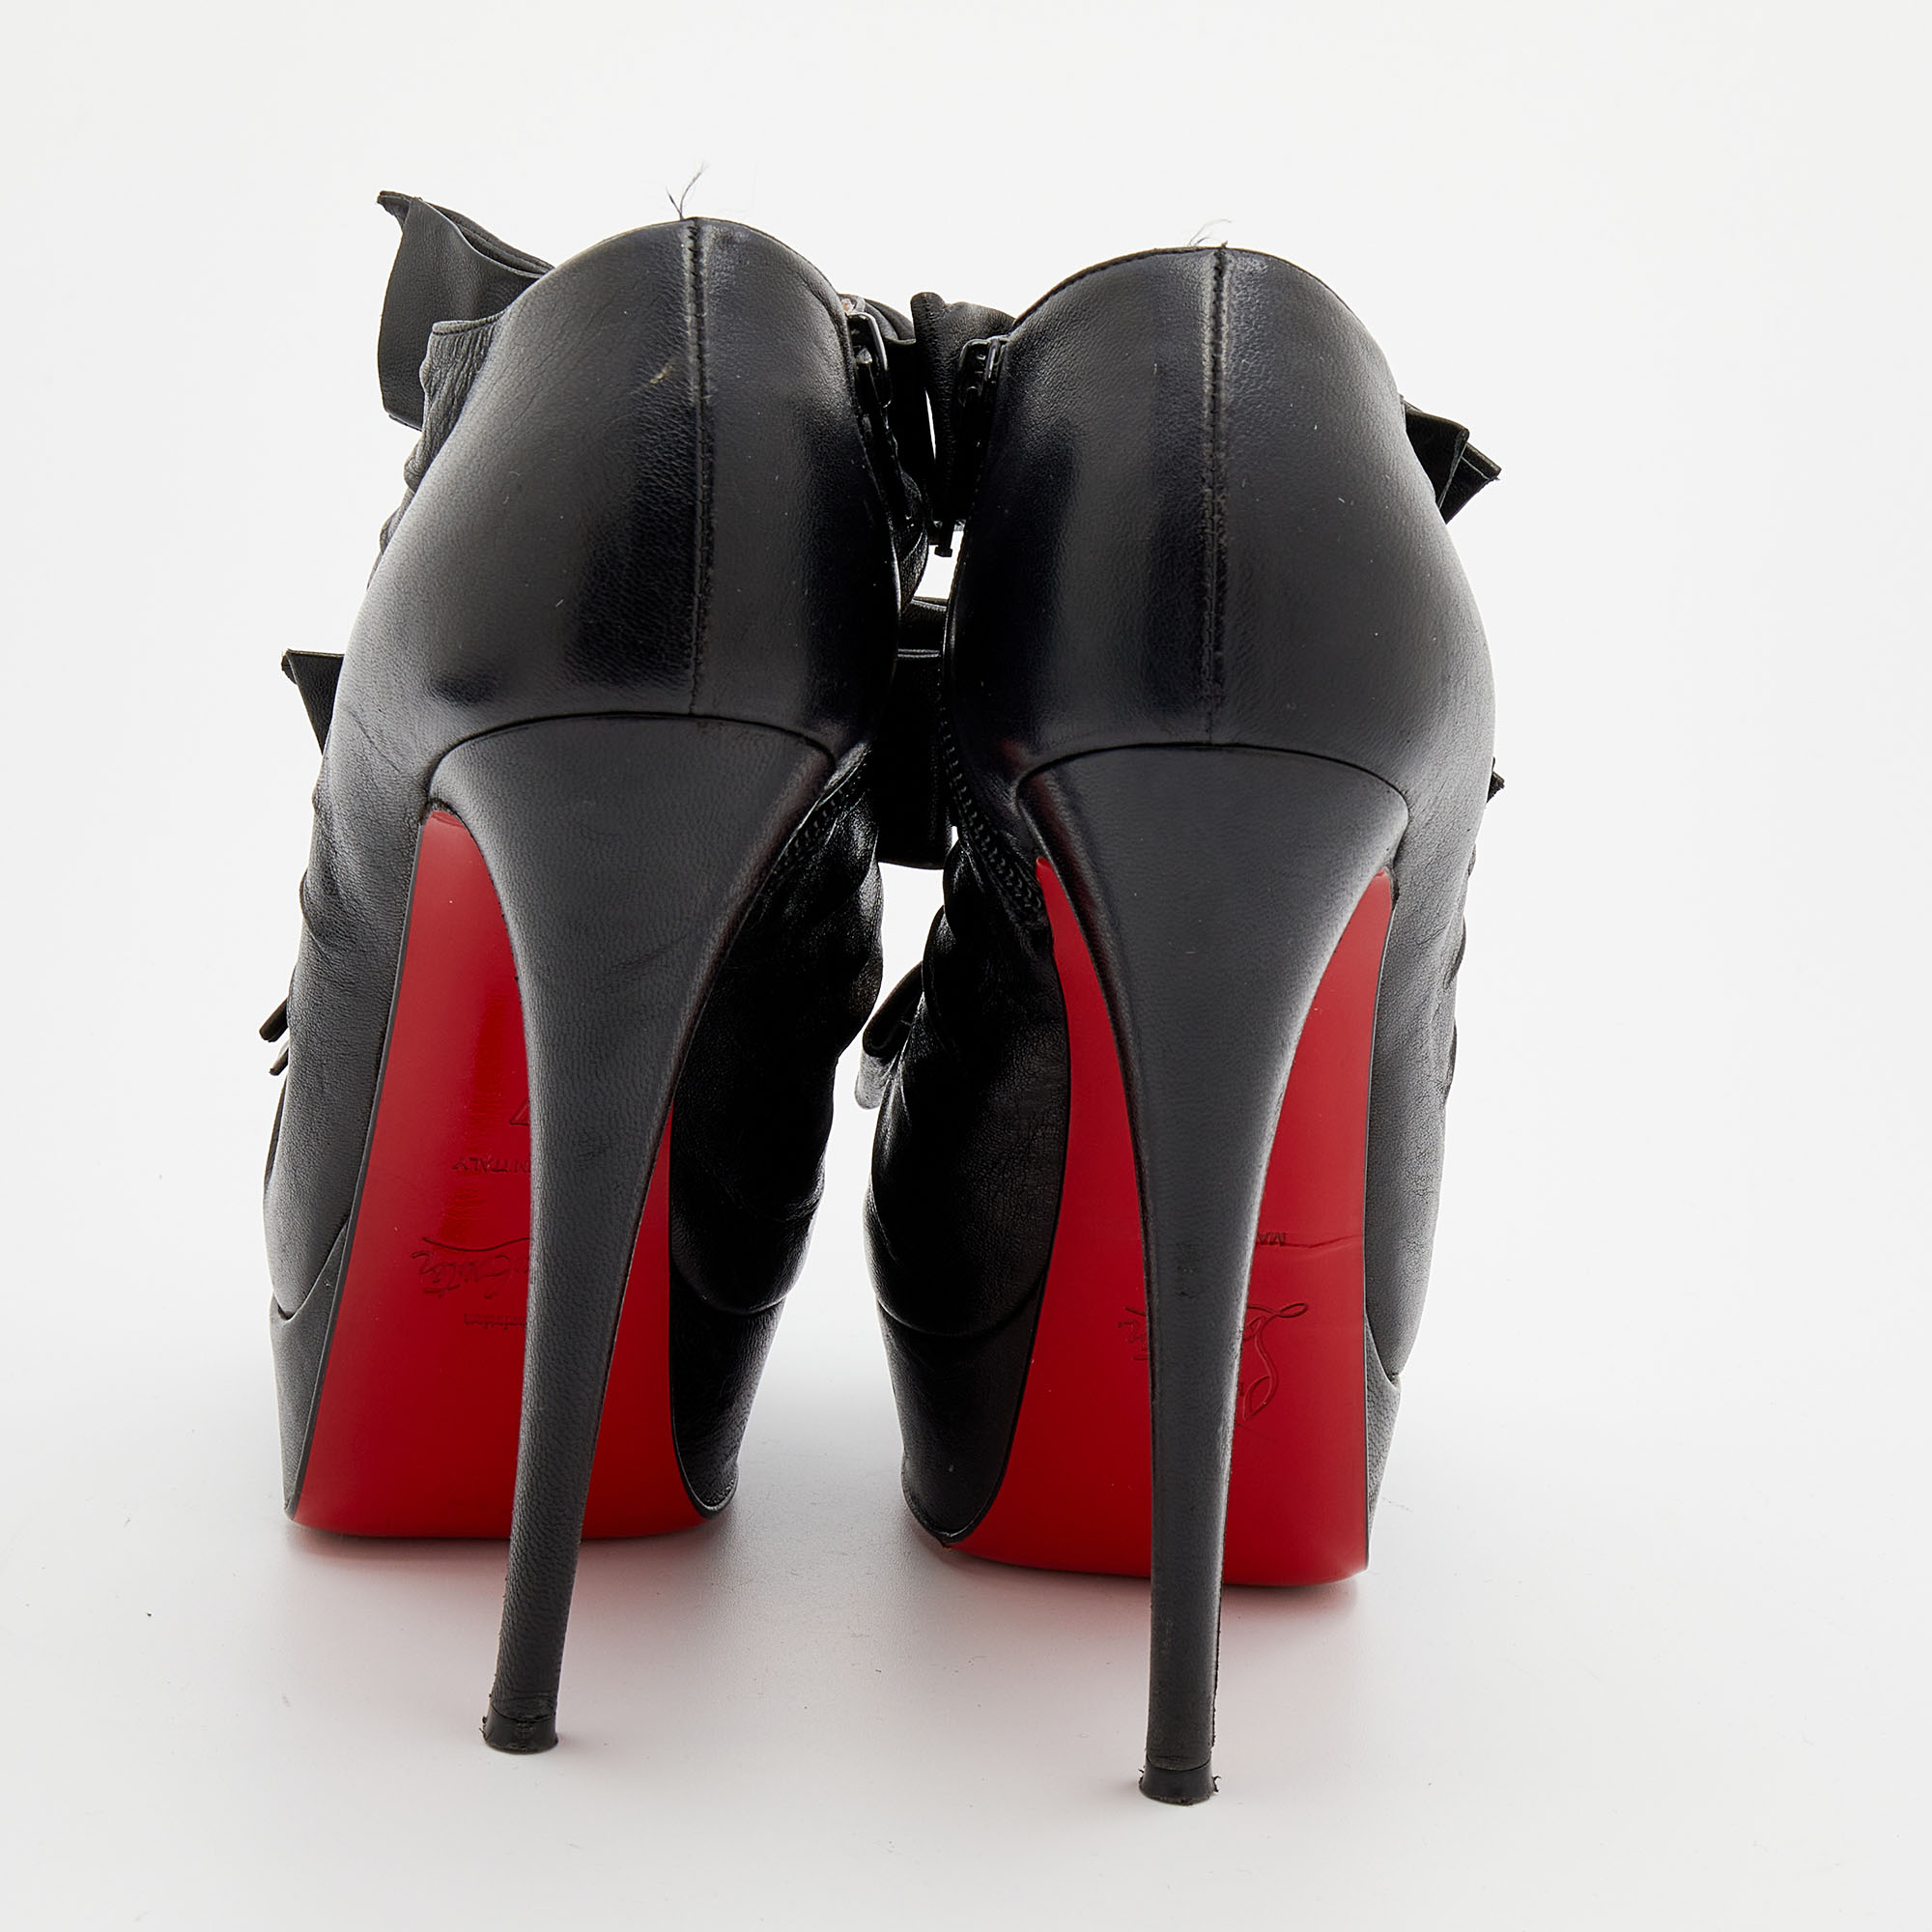 Christian Louboutin Black Leather Madame Butterfly Platform Booties Size 37